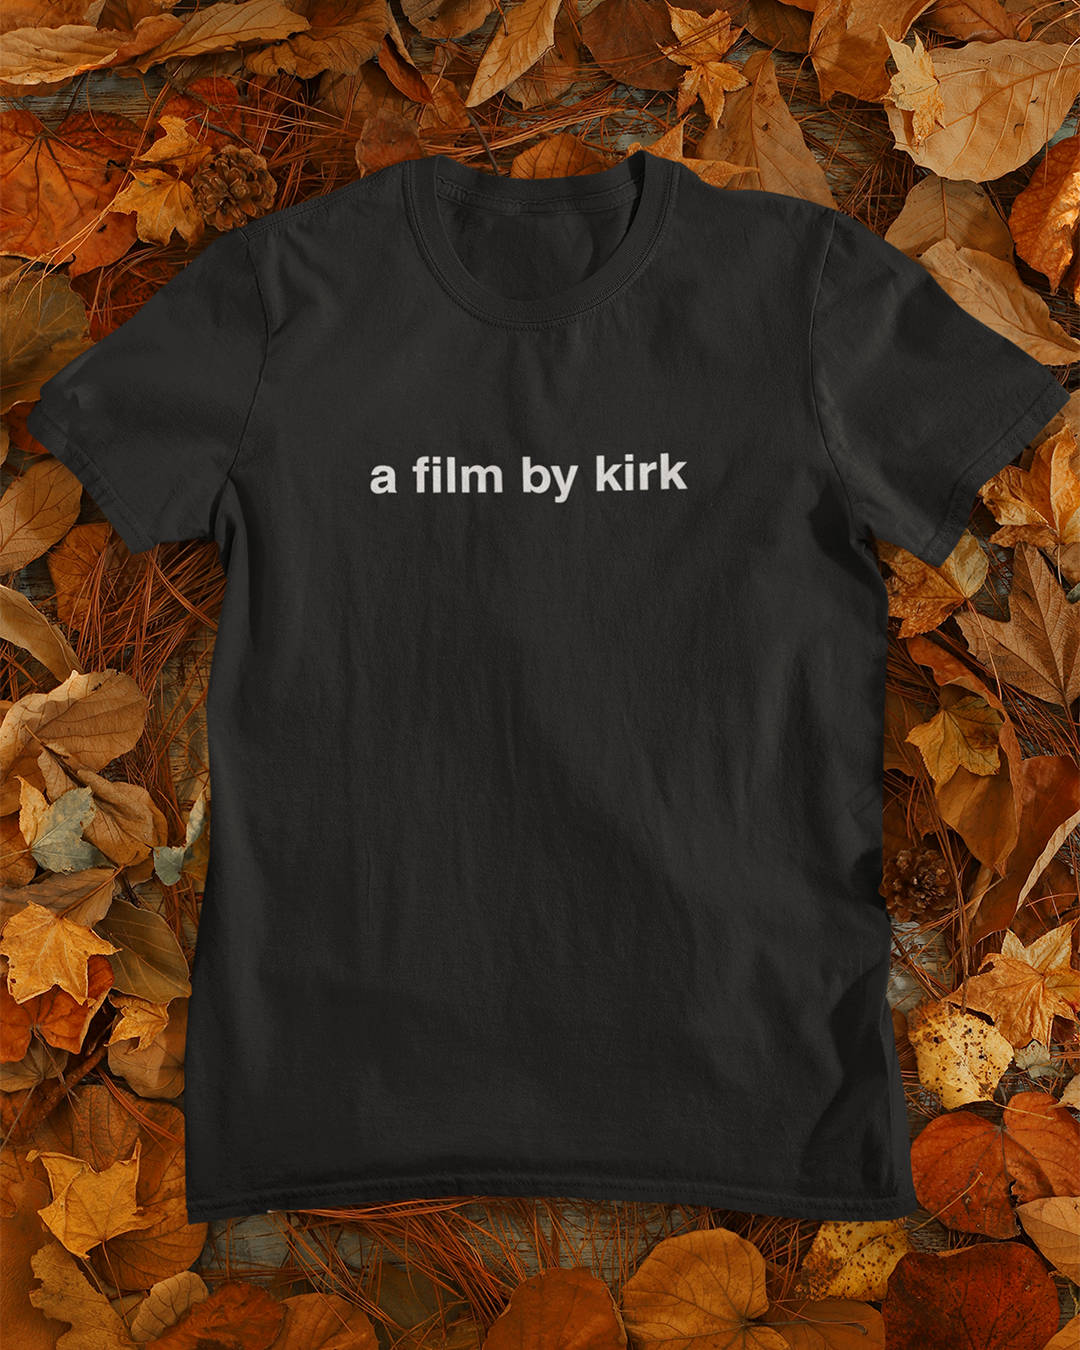 A Film By Kirk T-Shirt - Gilmore Girls Inspired T-Shirt - Kirk Gilmore Girls Stars Hollow T-Shirt - Gilmore Girls Inspired T-Shirt